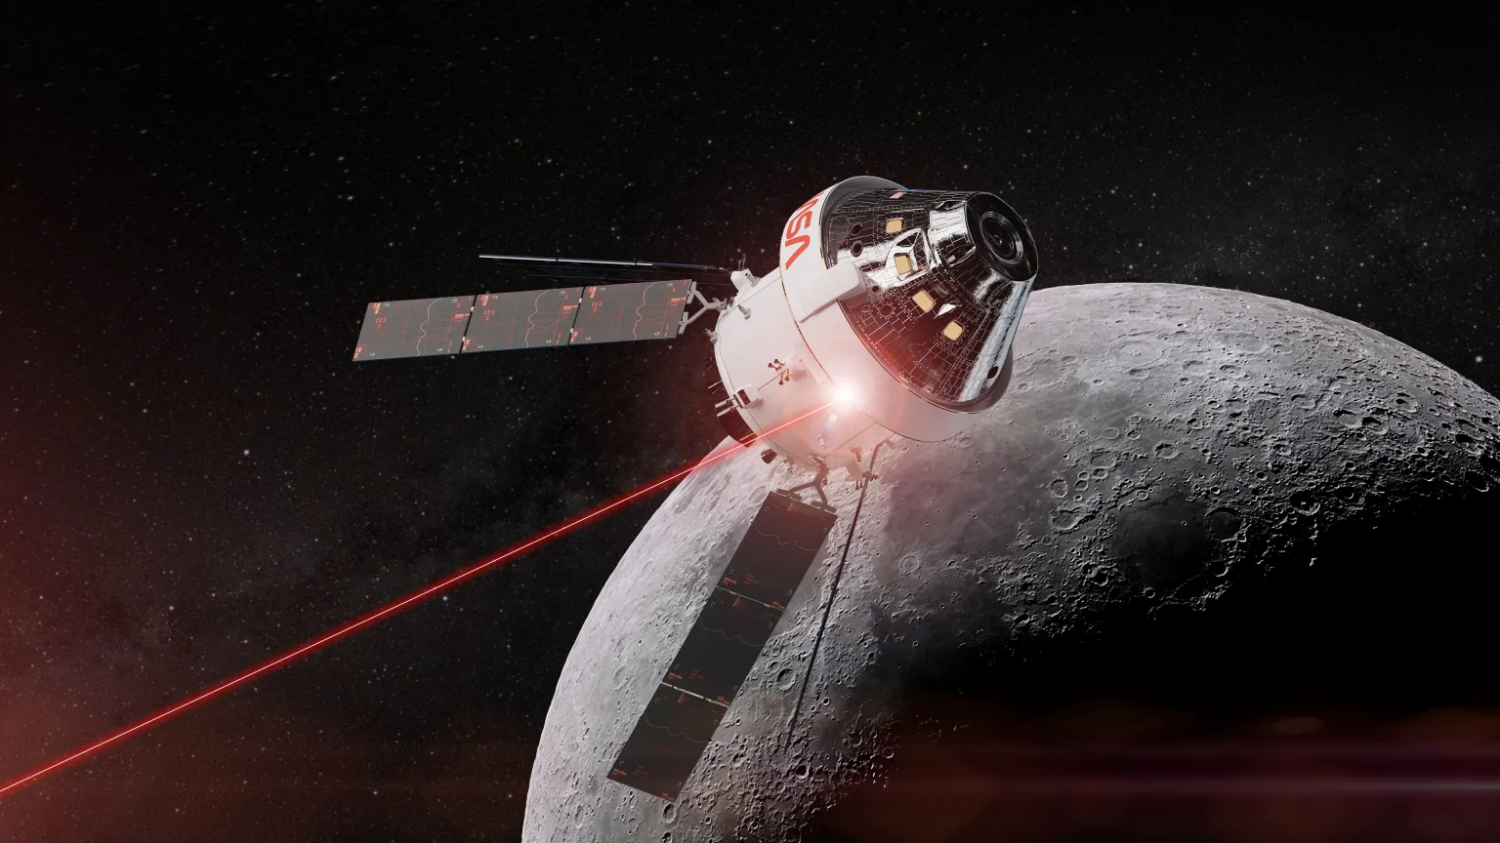 NASA Is Working With Small Businesses on Laser Communications Tech for Artemis Missions